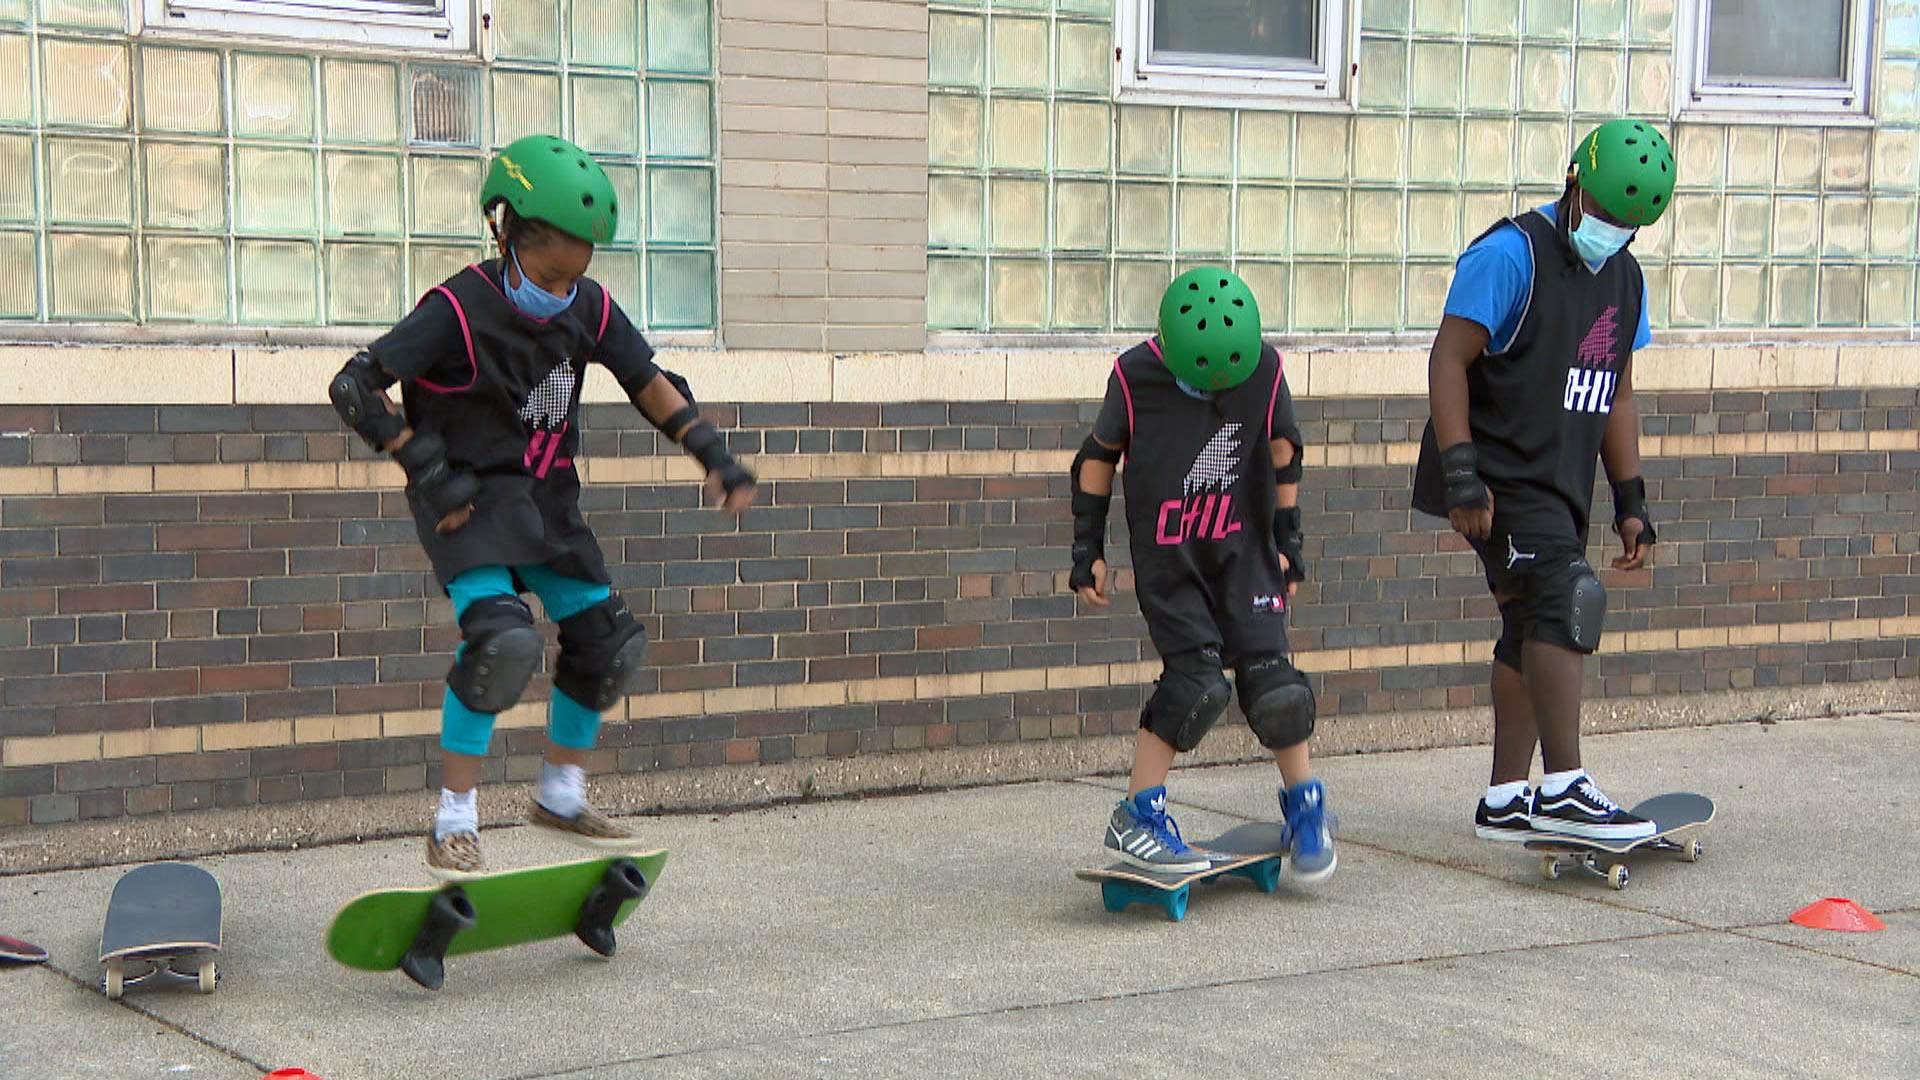 Toni A., left, flips her skateboard while receiving instruction from Temaris Dennis, right, the art instructor of the Louis L. Valentine Boys & Girls Club, on May 26, 2021. (WTTW News)